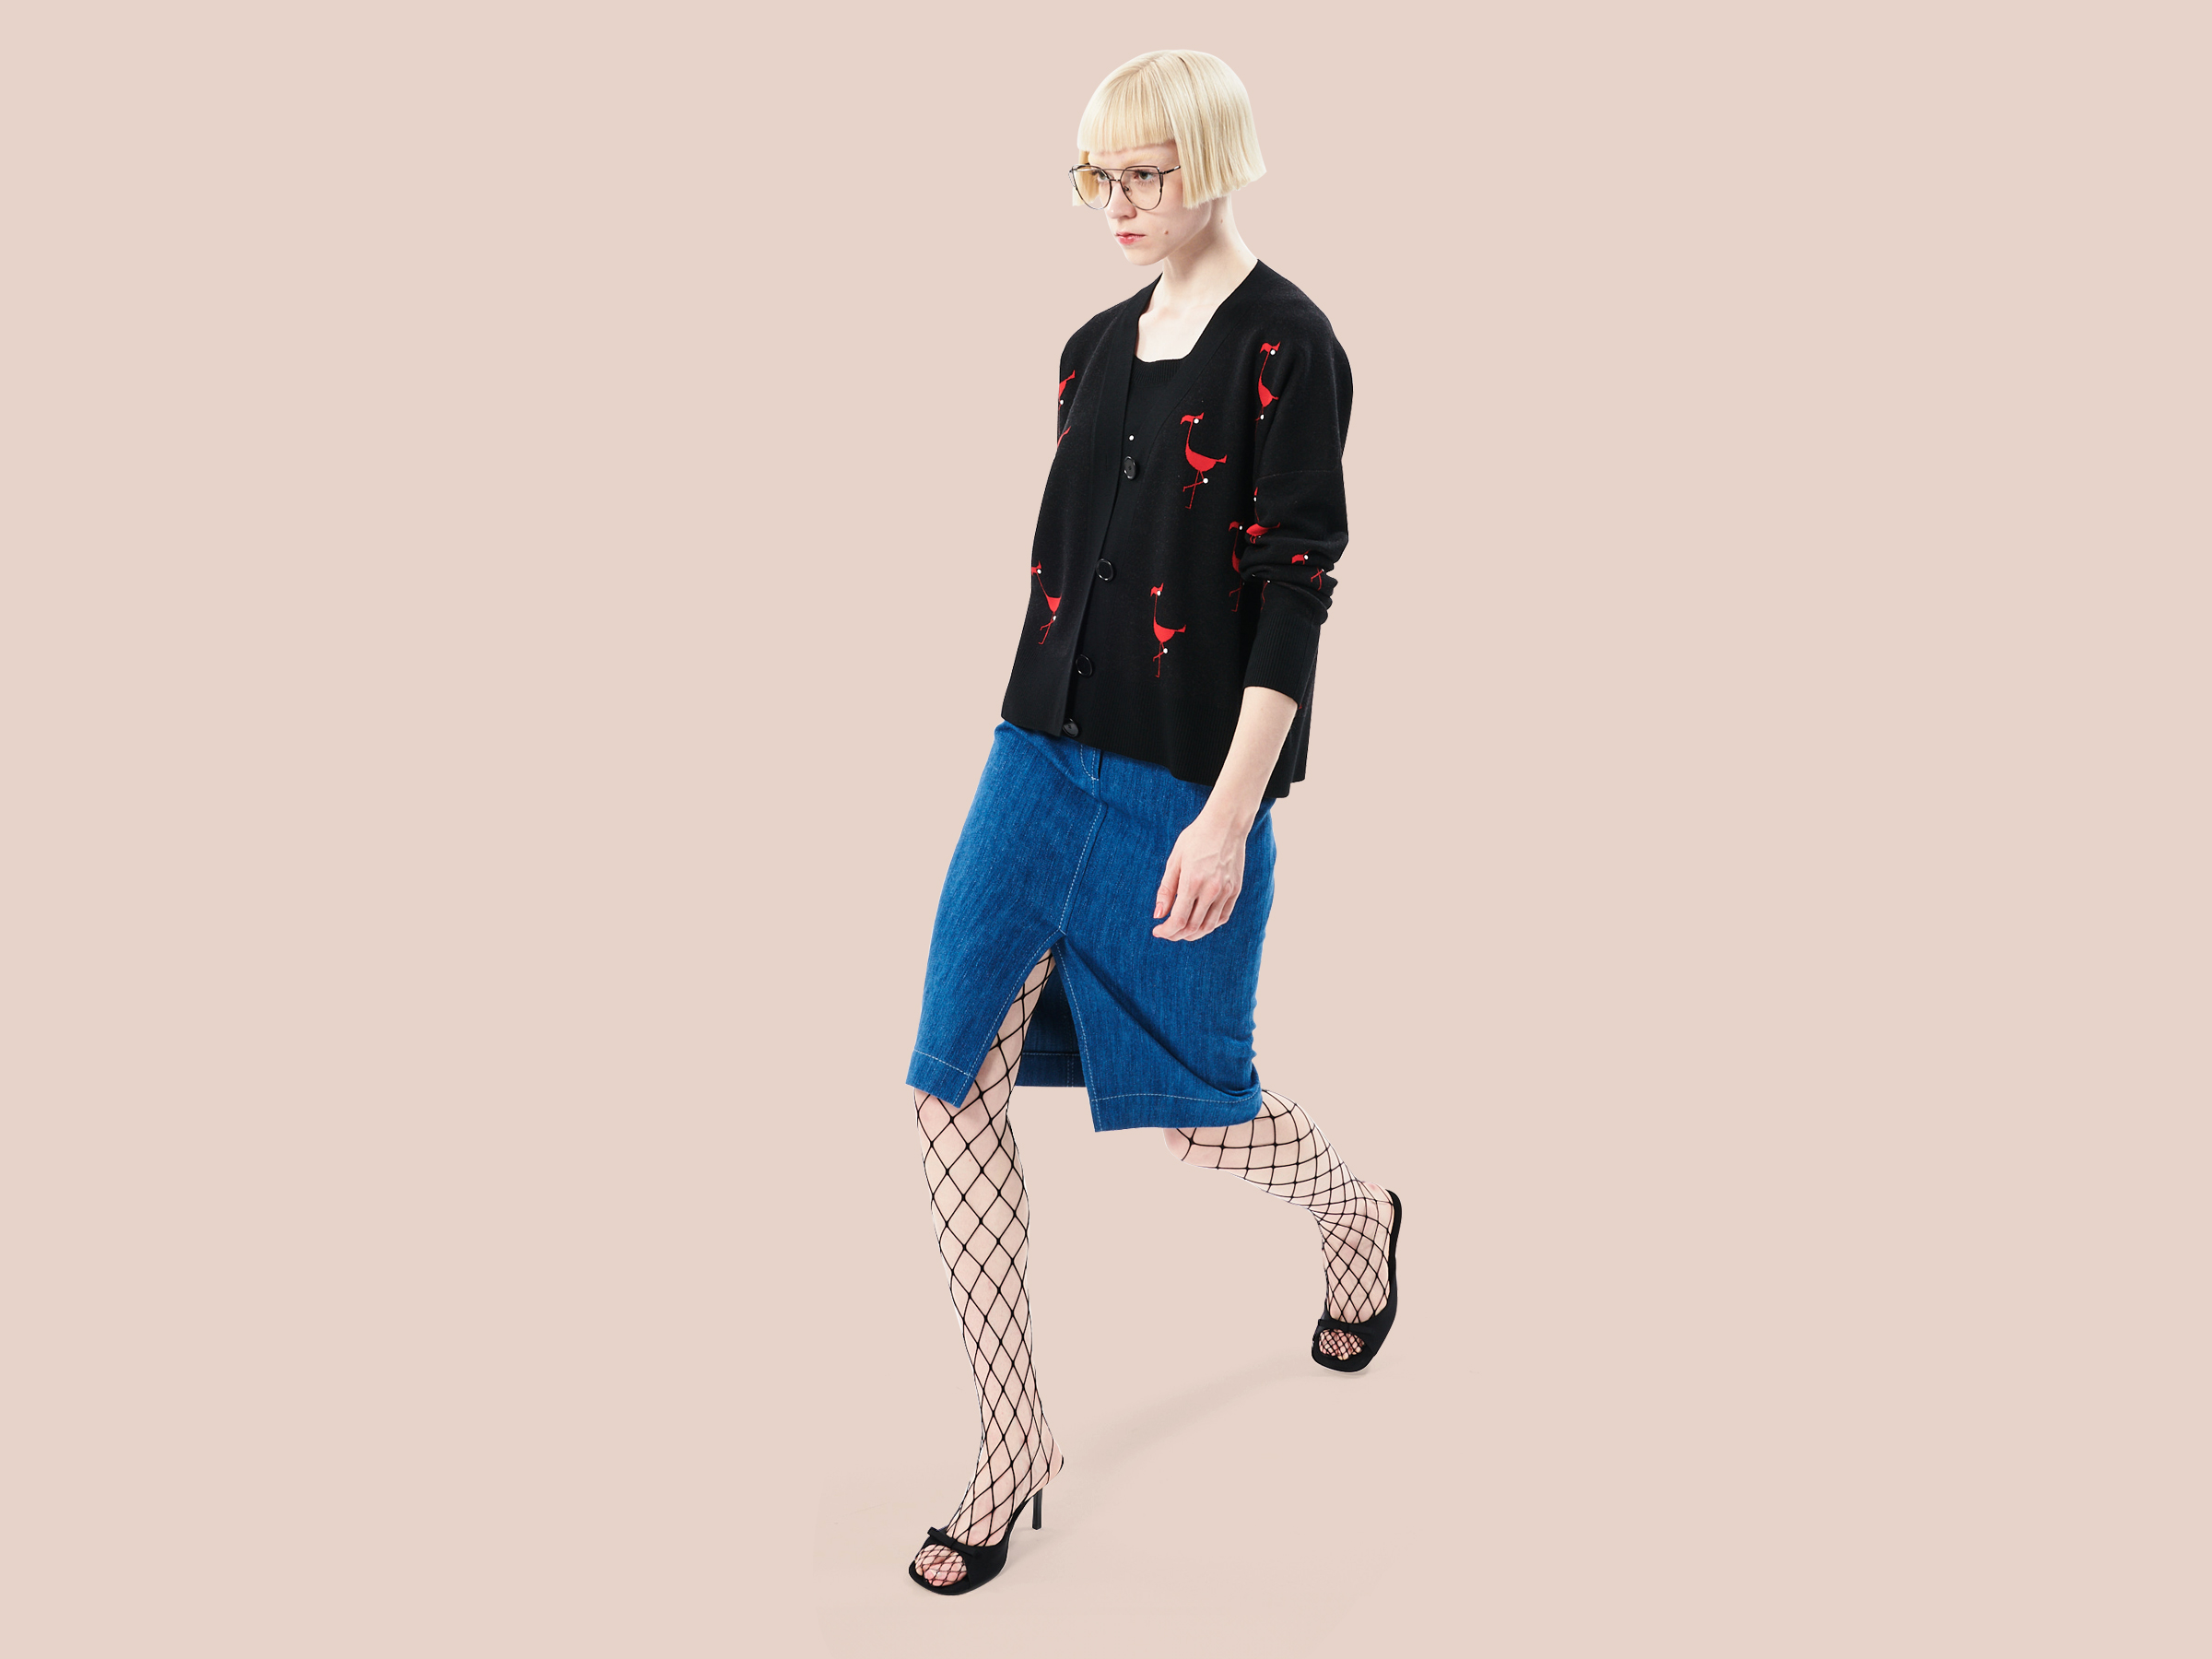 blonde woman with glasses wearing a black cardigan with red flamingos and a denim skirt